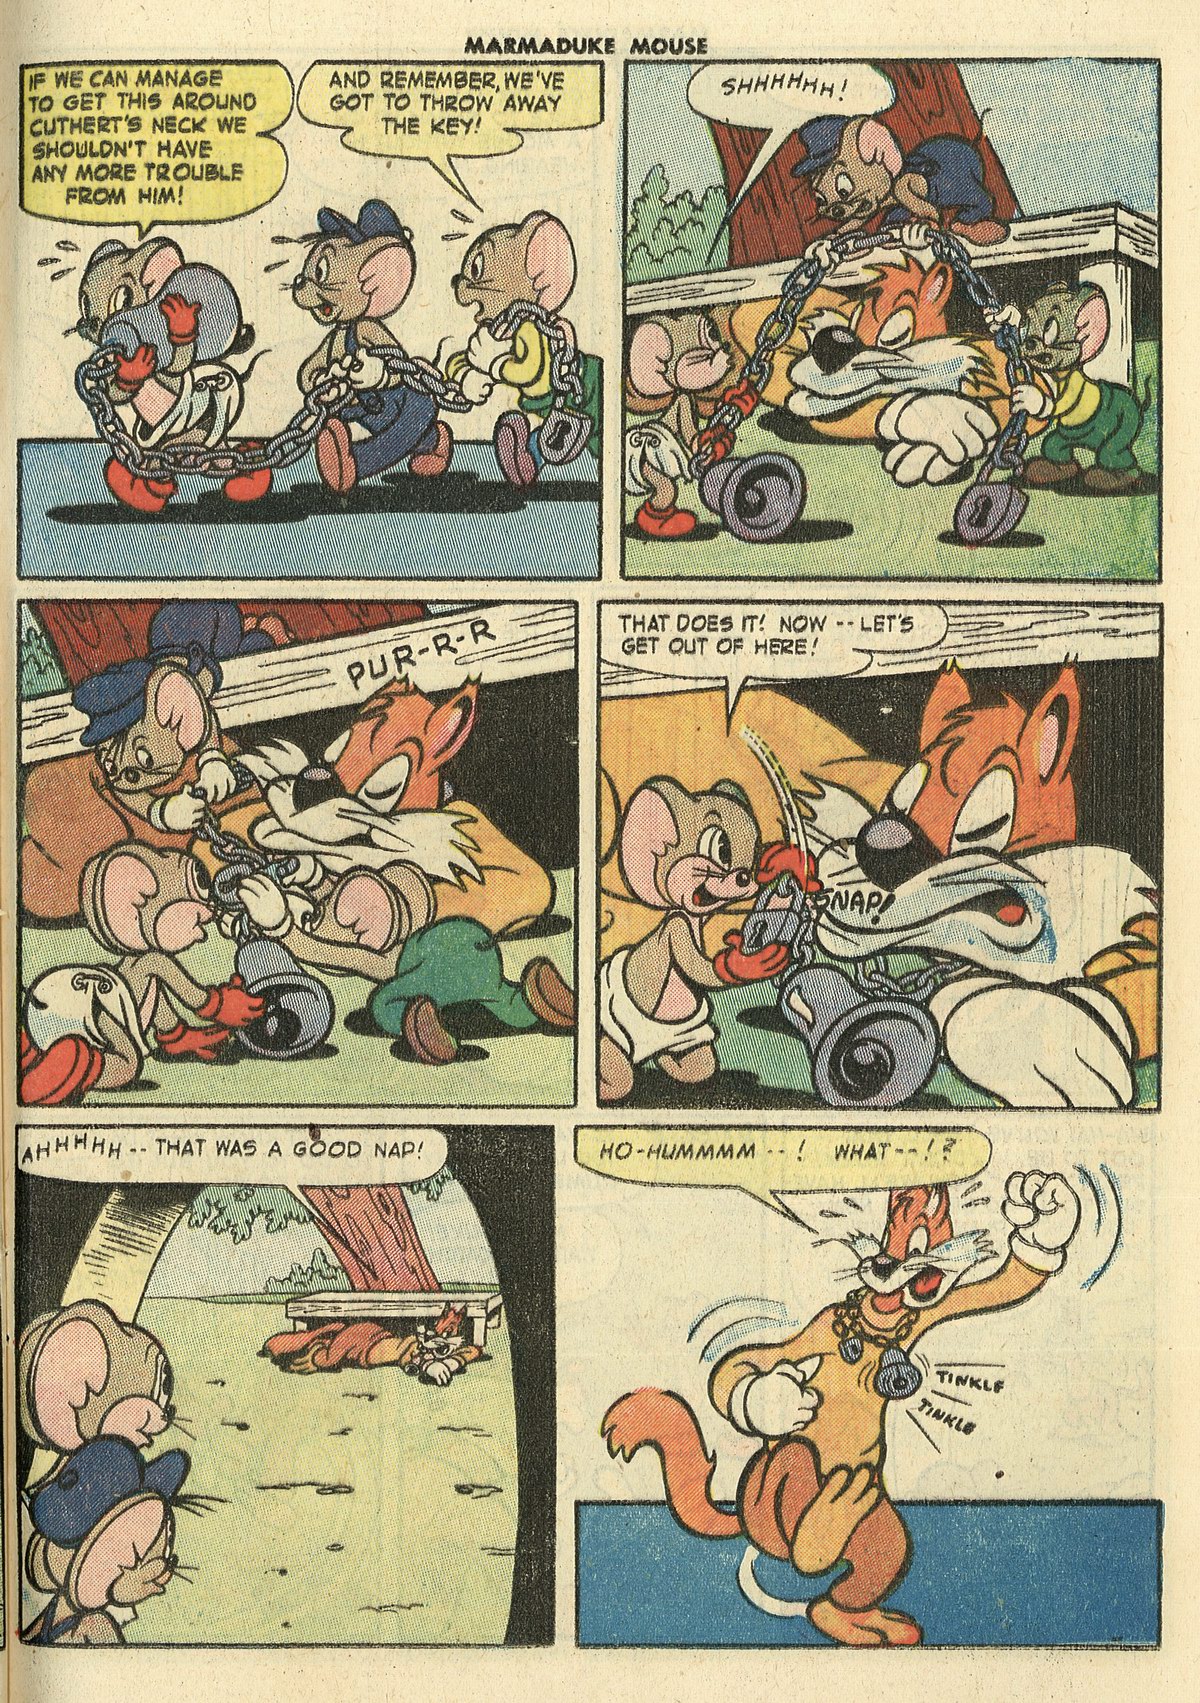 Read online Marmaduke Mouse comic -  Issue #49 - 25